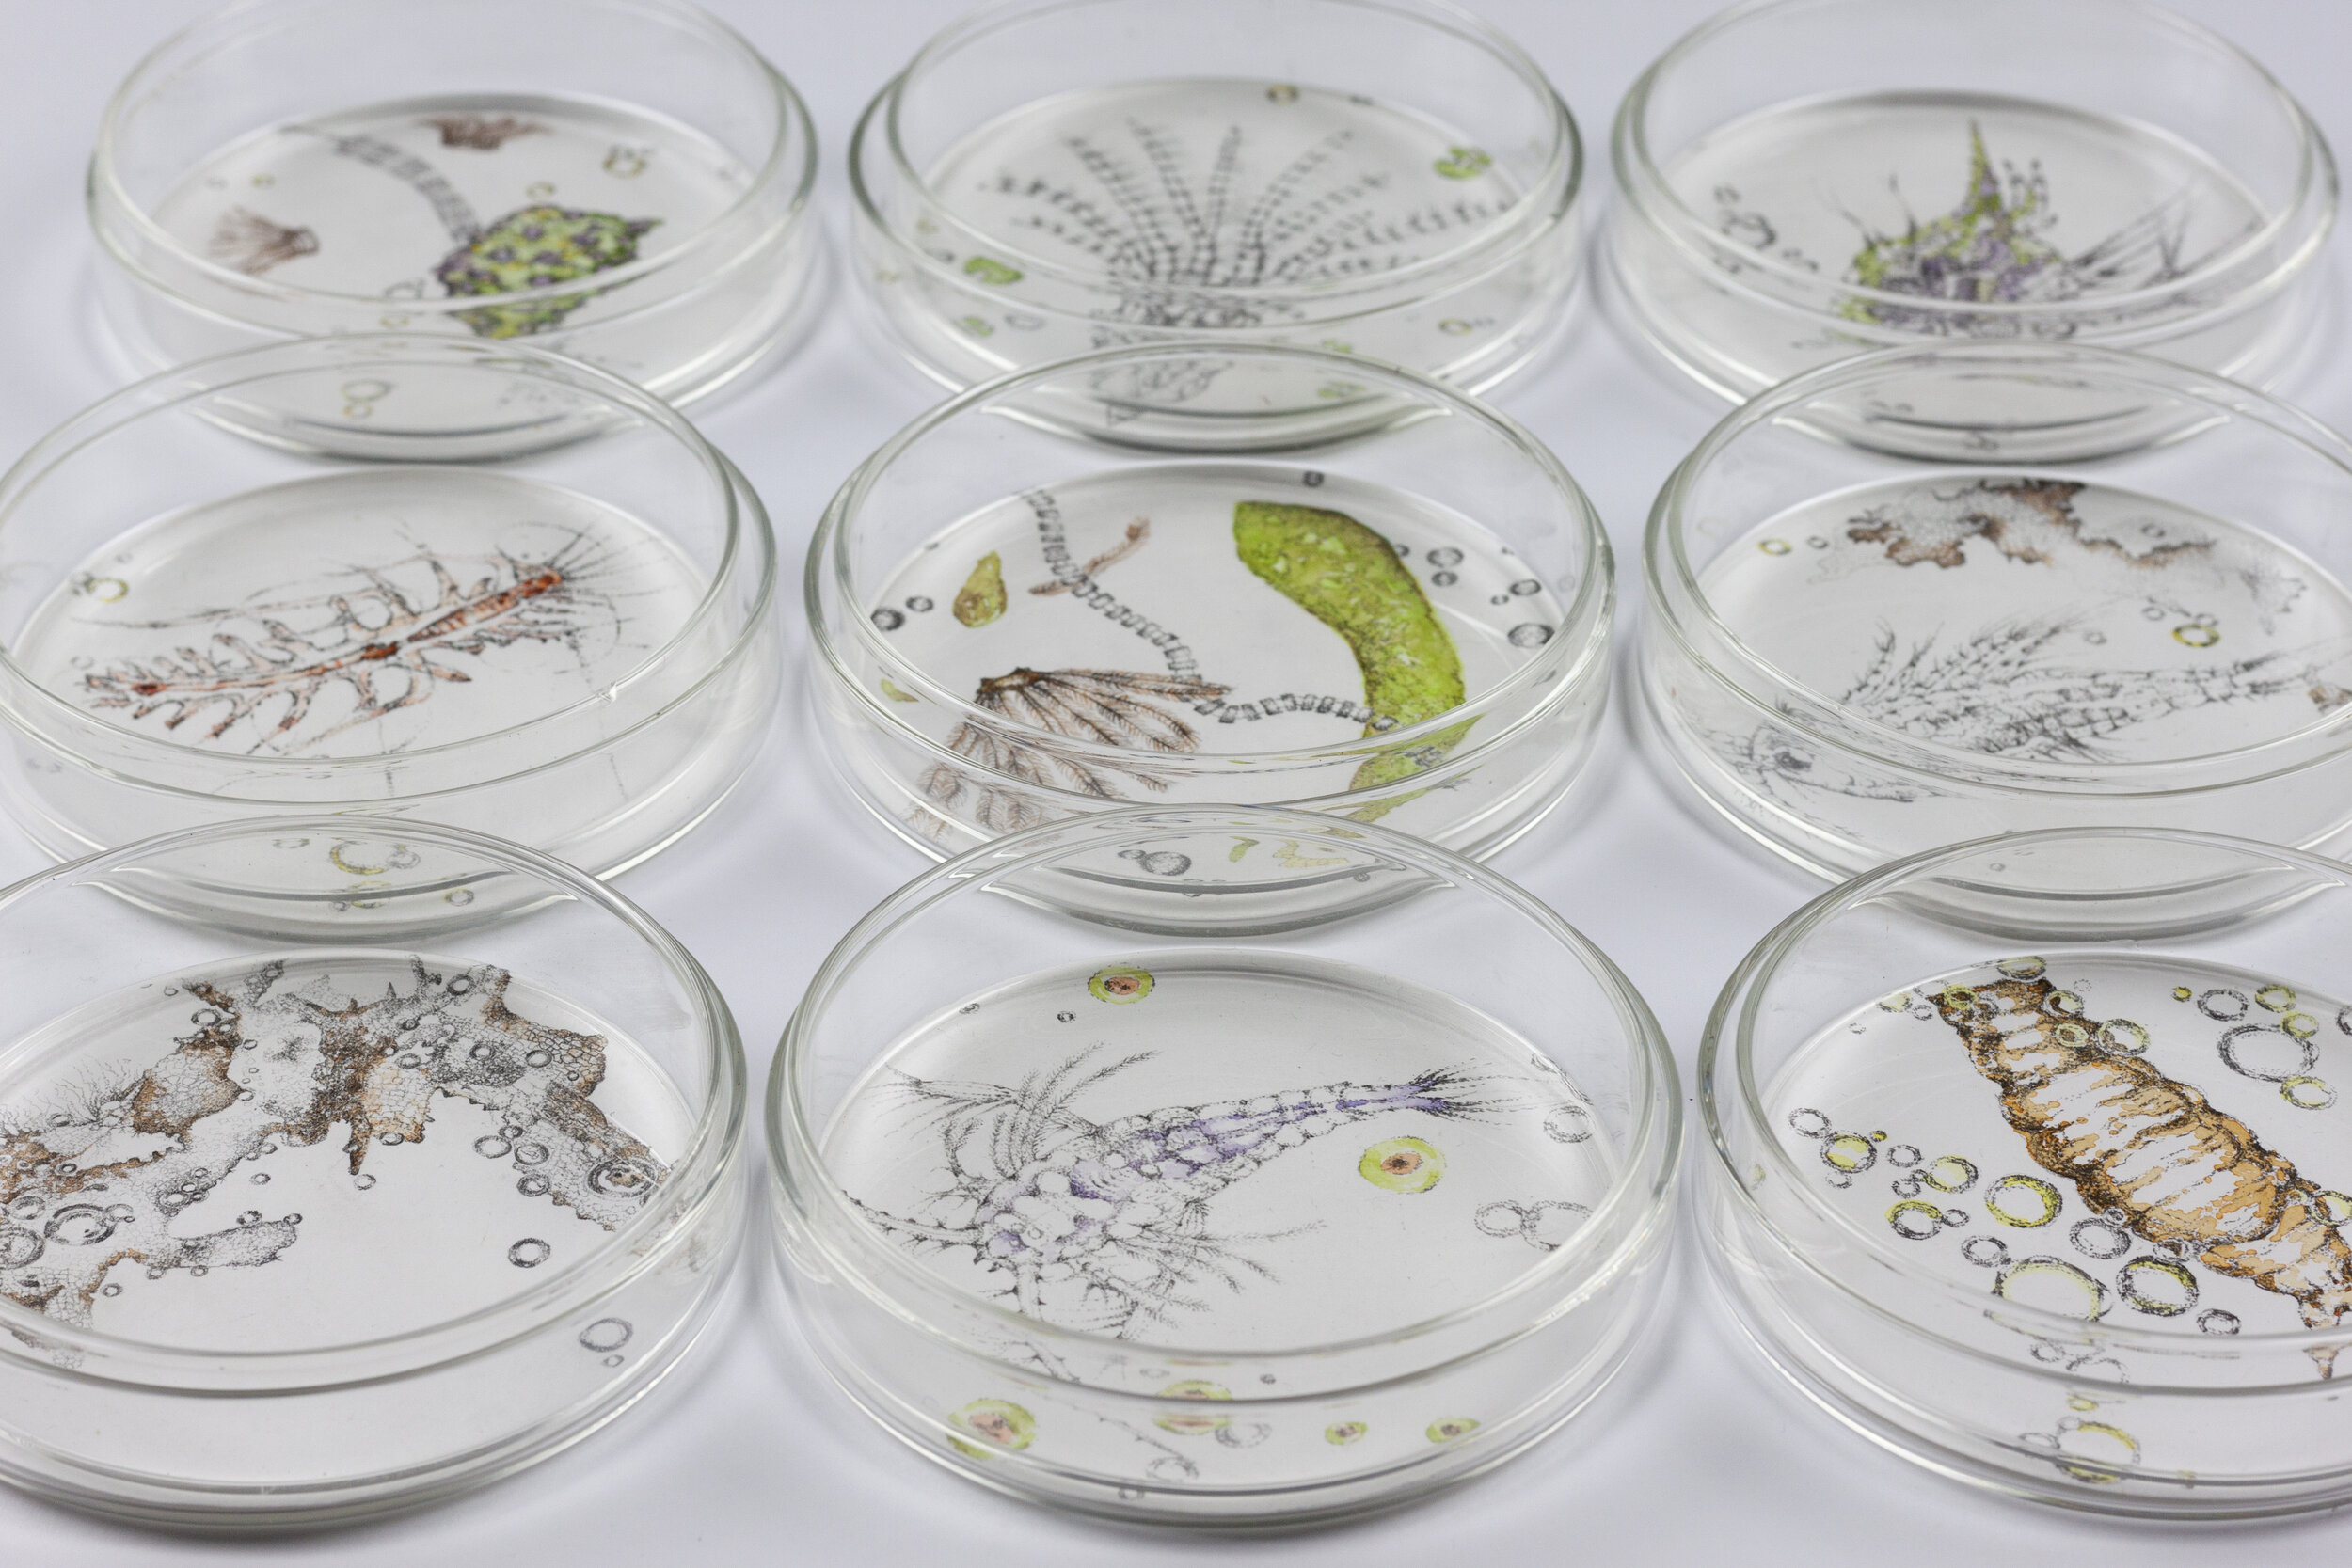  Beautiful works from Julie Nash. Life in a petri dish! The ultimate science art collaboration.  